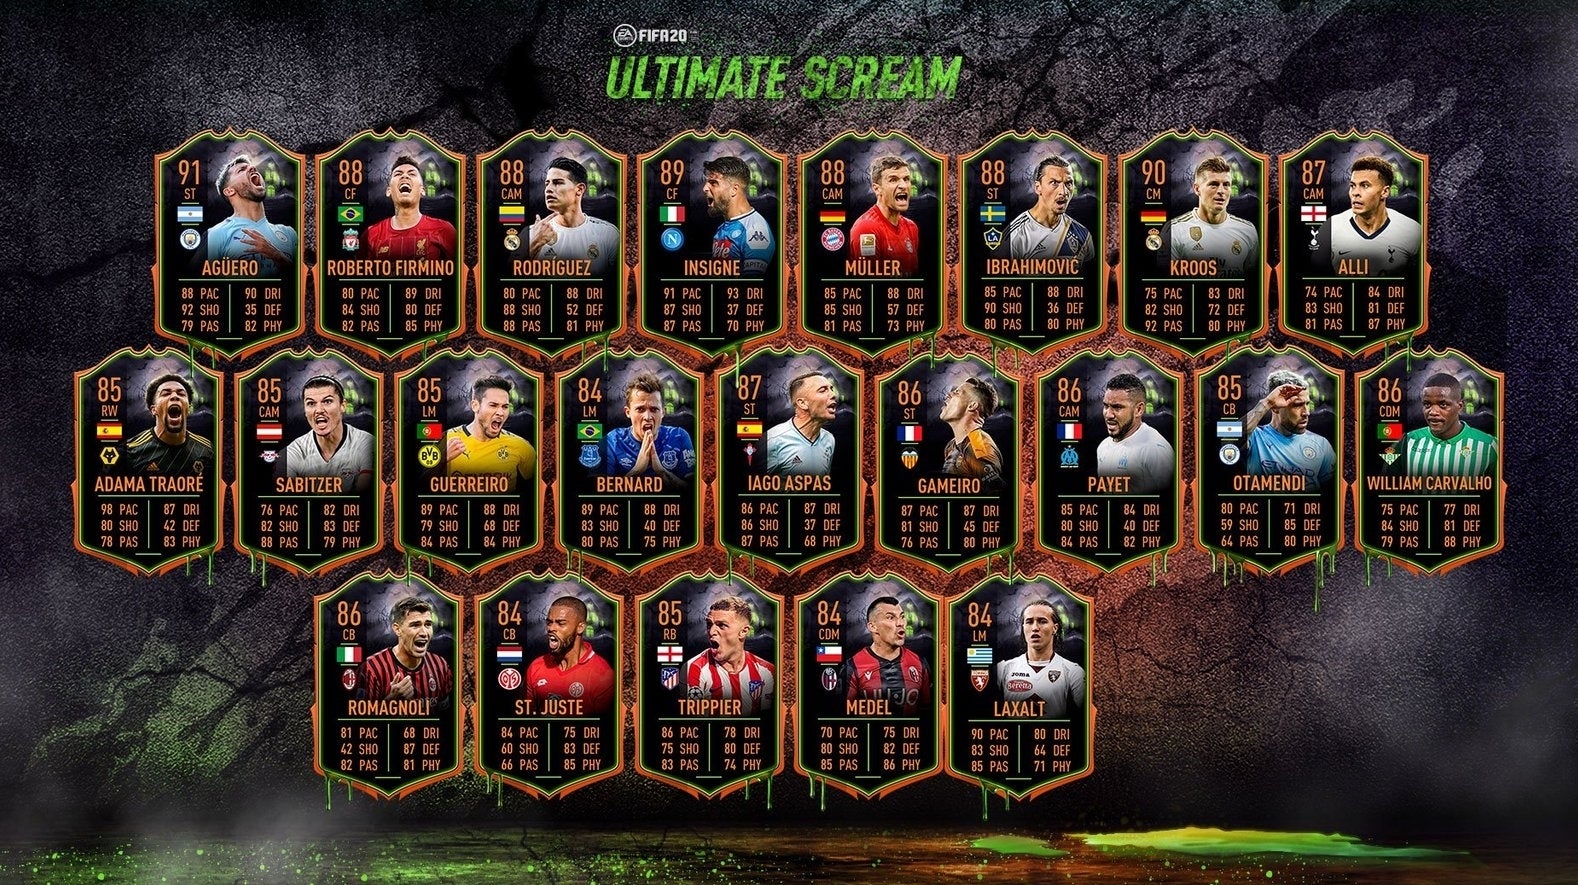 Image for FIFA 20 Ultimate Scream cards and players list: Giovinco, Ozil, Pique and the Ultimate Scream end date and time